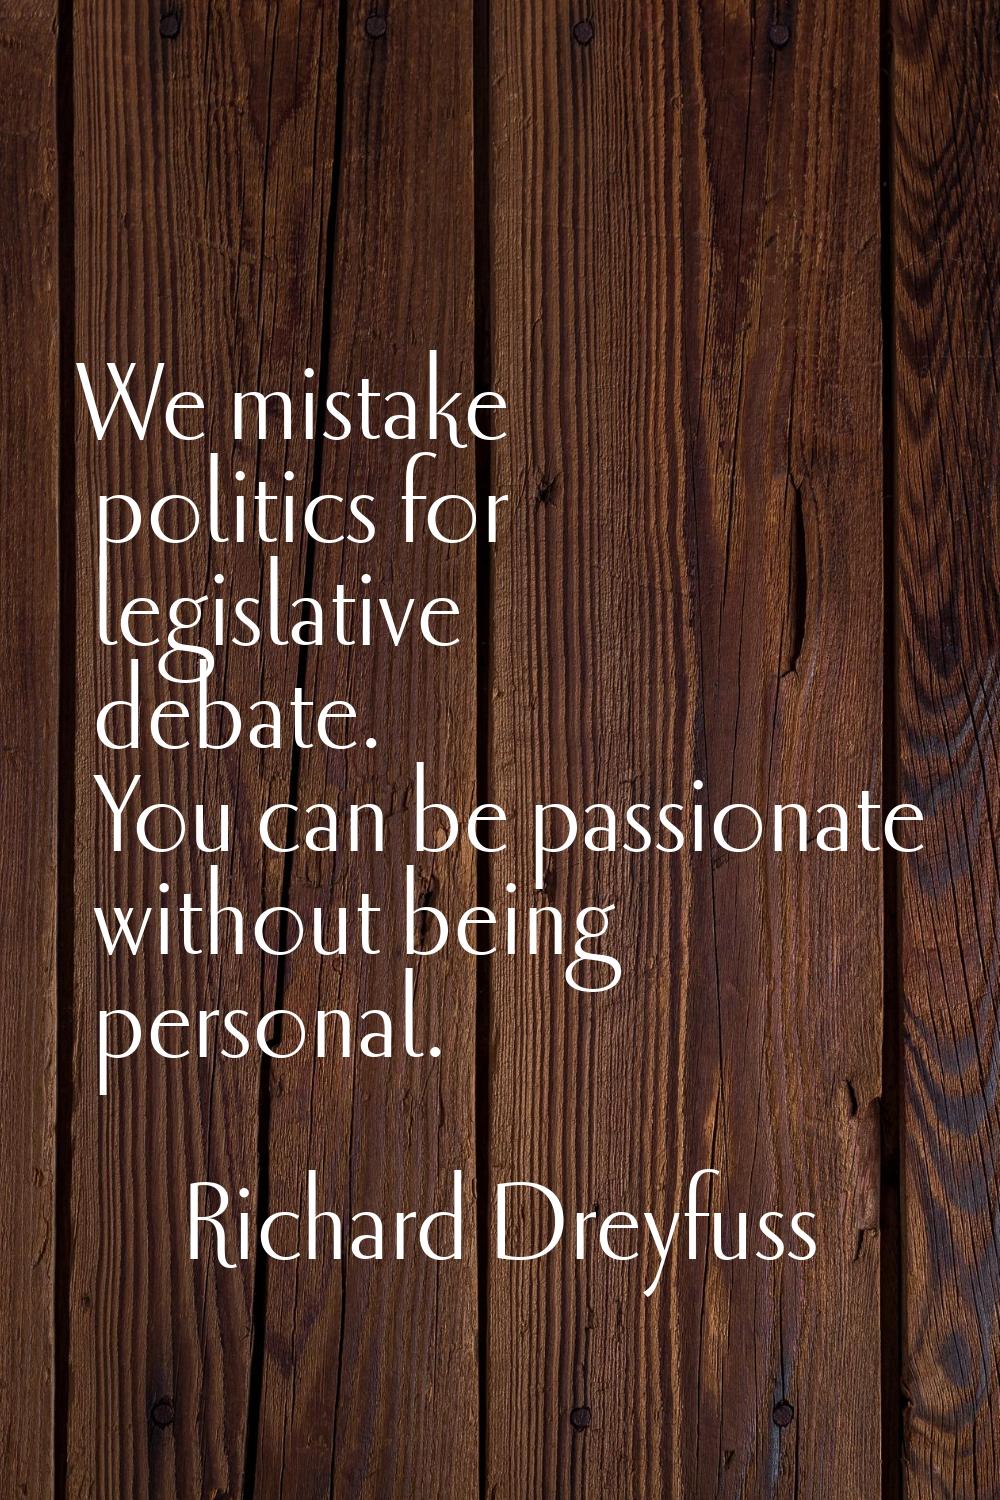 We mistake politics for legislative debate. You can be passionate without being personal.